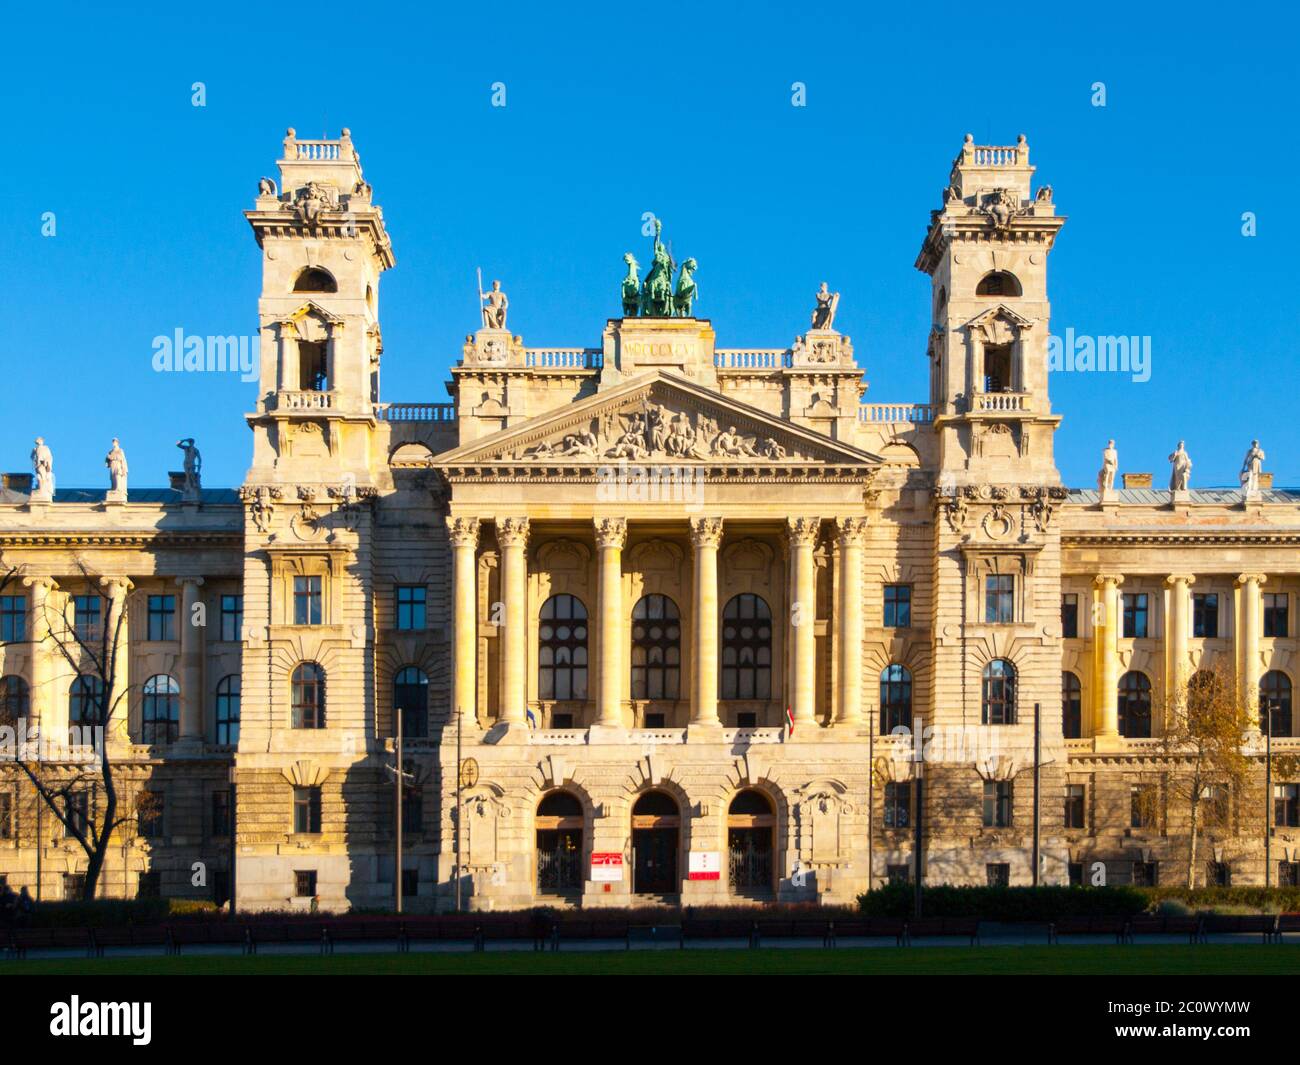 Hungarian National Museum of Ethnography, aka Neprajzi Muzeum, at Kossuth Lajos Square in Budapest, Hungary, Europe. Front view of entrance portal with two towers and architectural columns on sunny day with clear blue sky. UNESCO World Heritage Site. Stock Photo